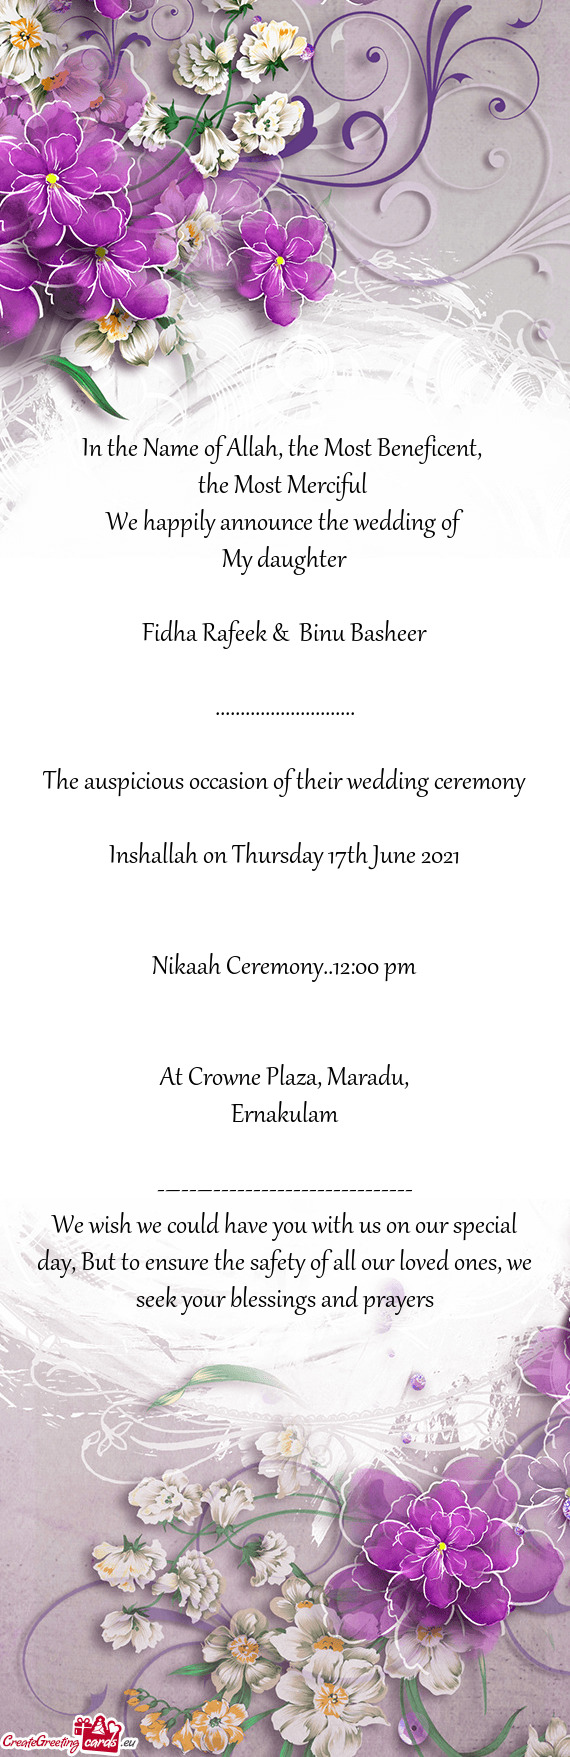 We wish we could have you with us on our special day, But to ensure the safety of all our loved ones